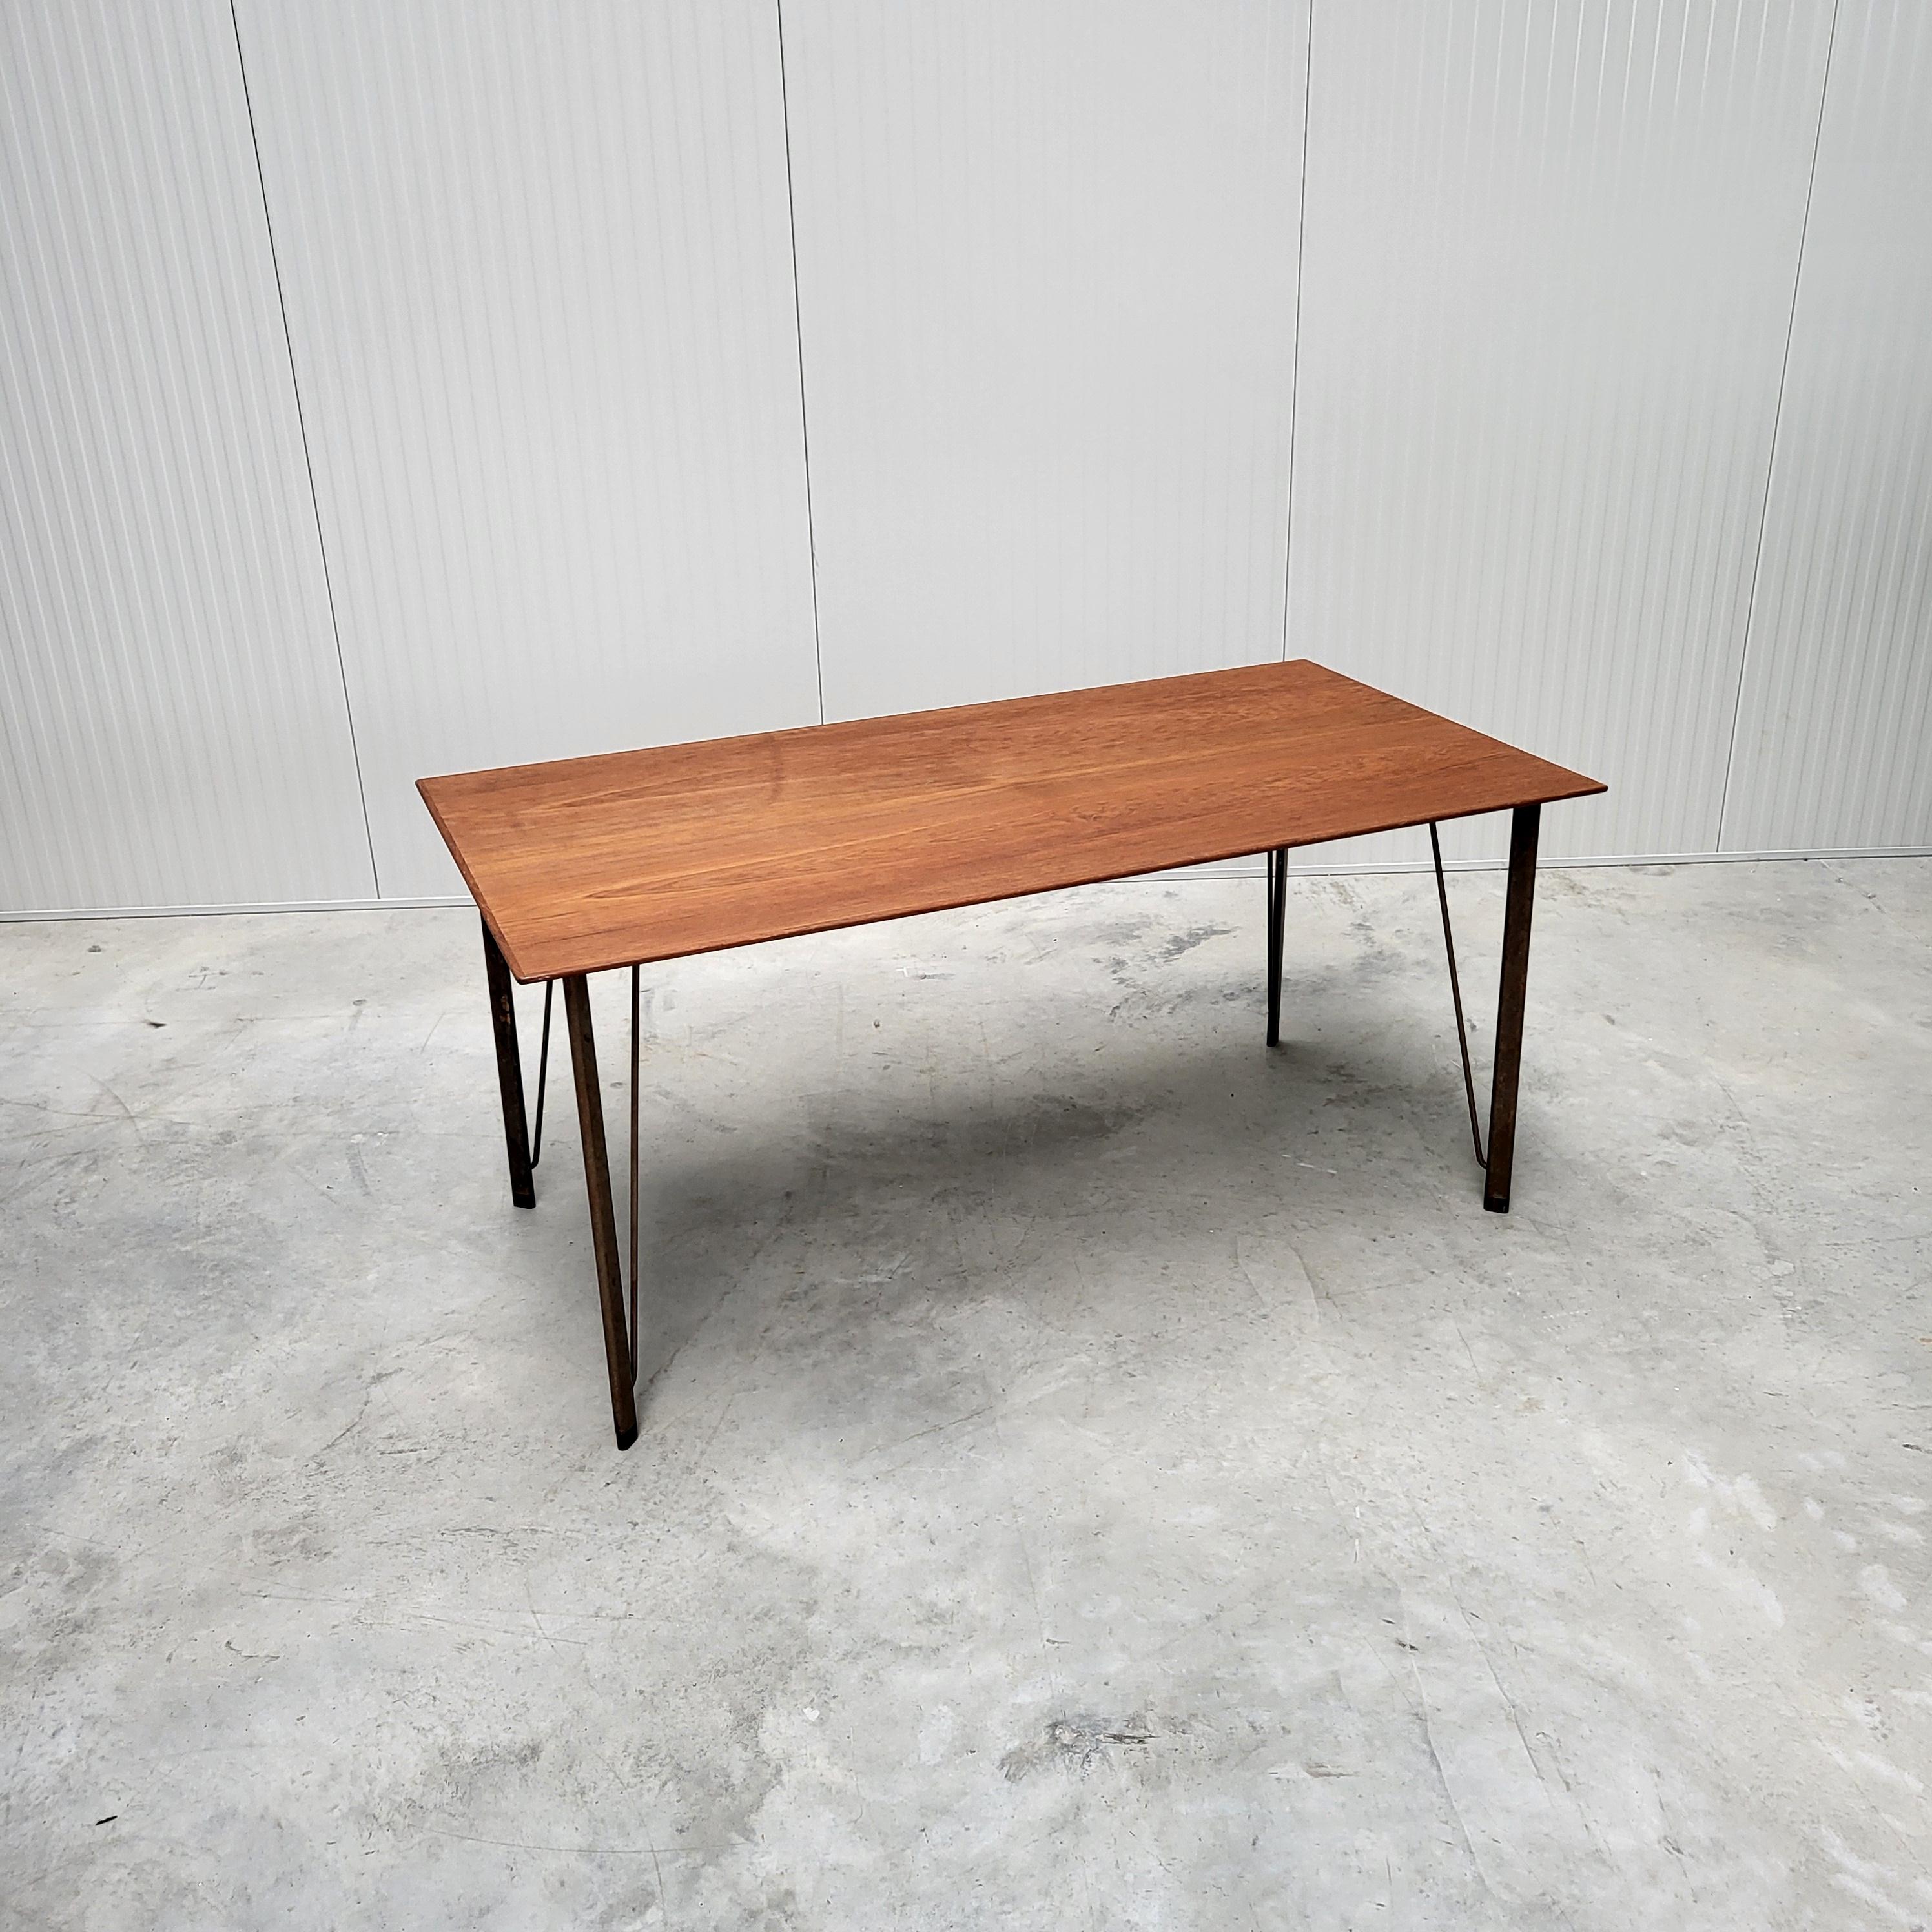 Fine and very rare table by Arne Jacobsen for Fritz Hansen orginial out of the SAS Hotel in Kopenhagen made in 1958. This table comes out of the inventory from the famous SAS Hotel designed by Arne Jacobsen in 1958. 

Important to mention is that